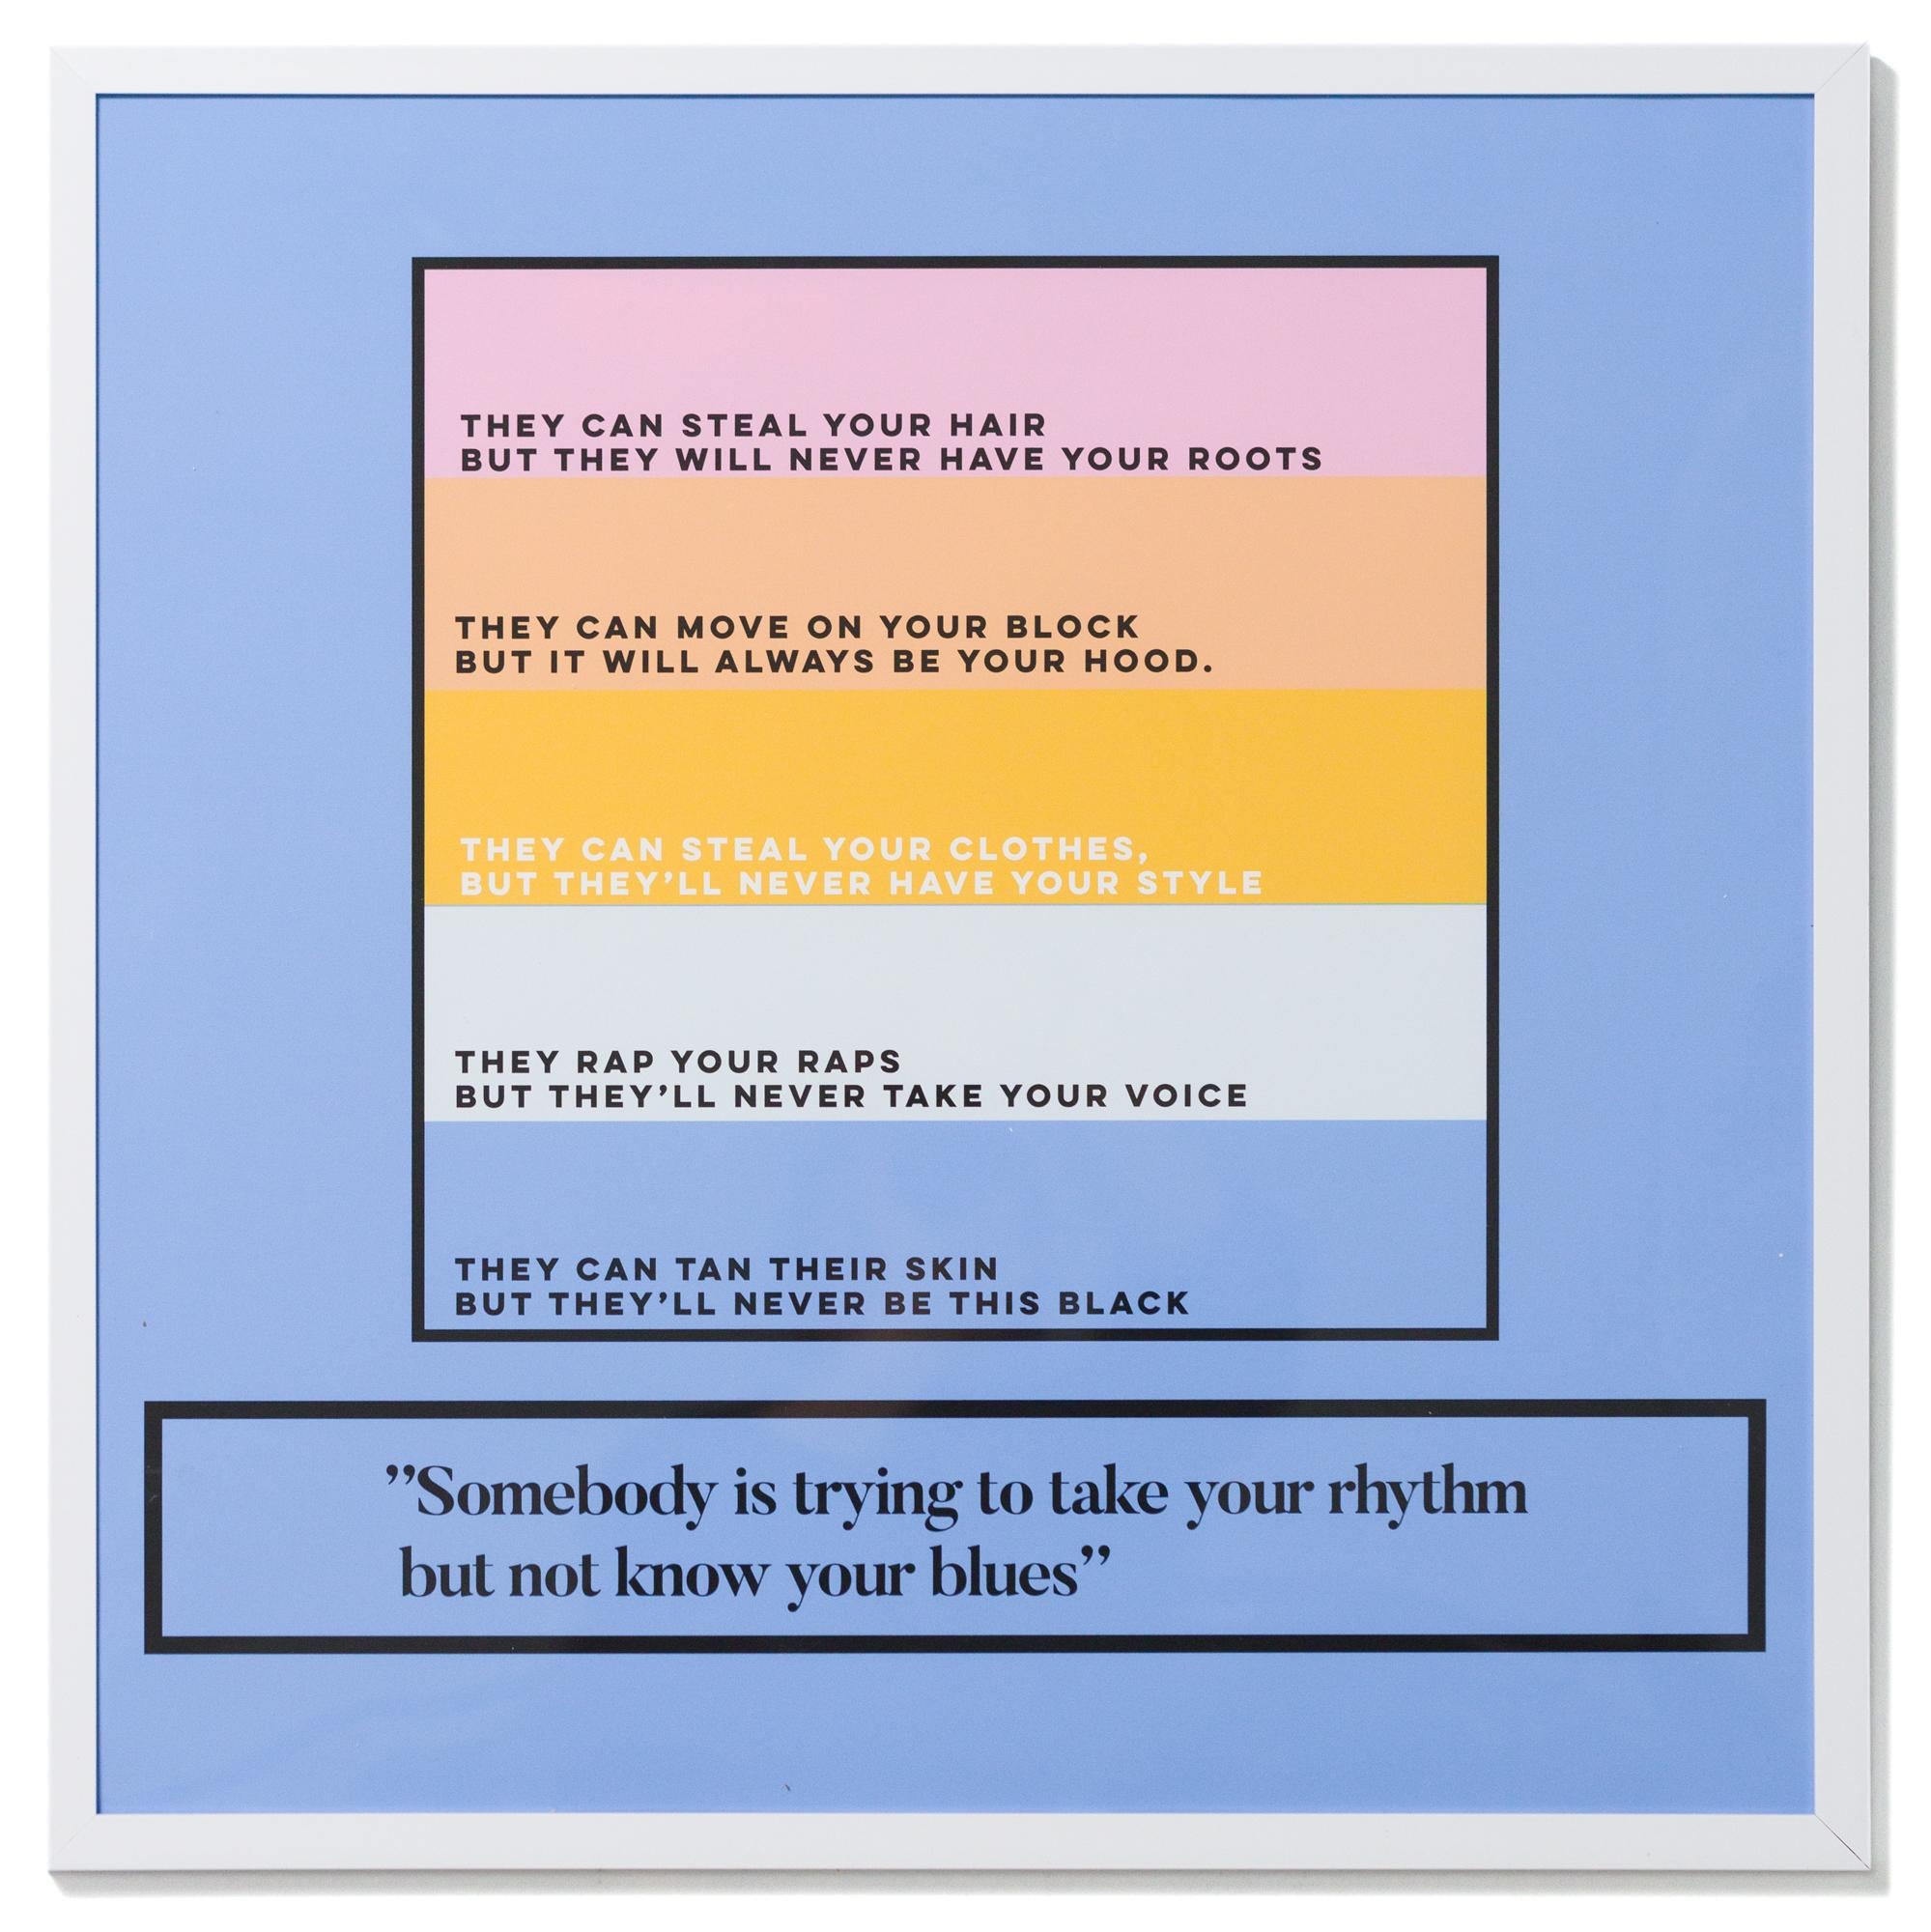 "Somebody is trying to take your rhythm but not know your blues" is a limited edition print by Jordan Plain printed on archival paper. This piece measures 21"h x 21"w framed and is shipped in the pictured white frame. Edition of 5. 

Jordan Plain is